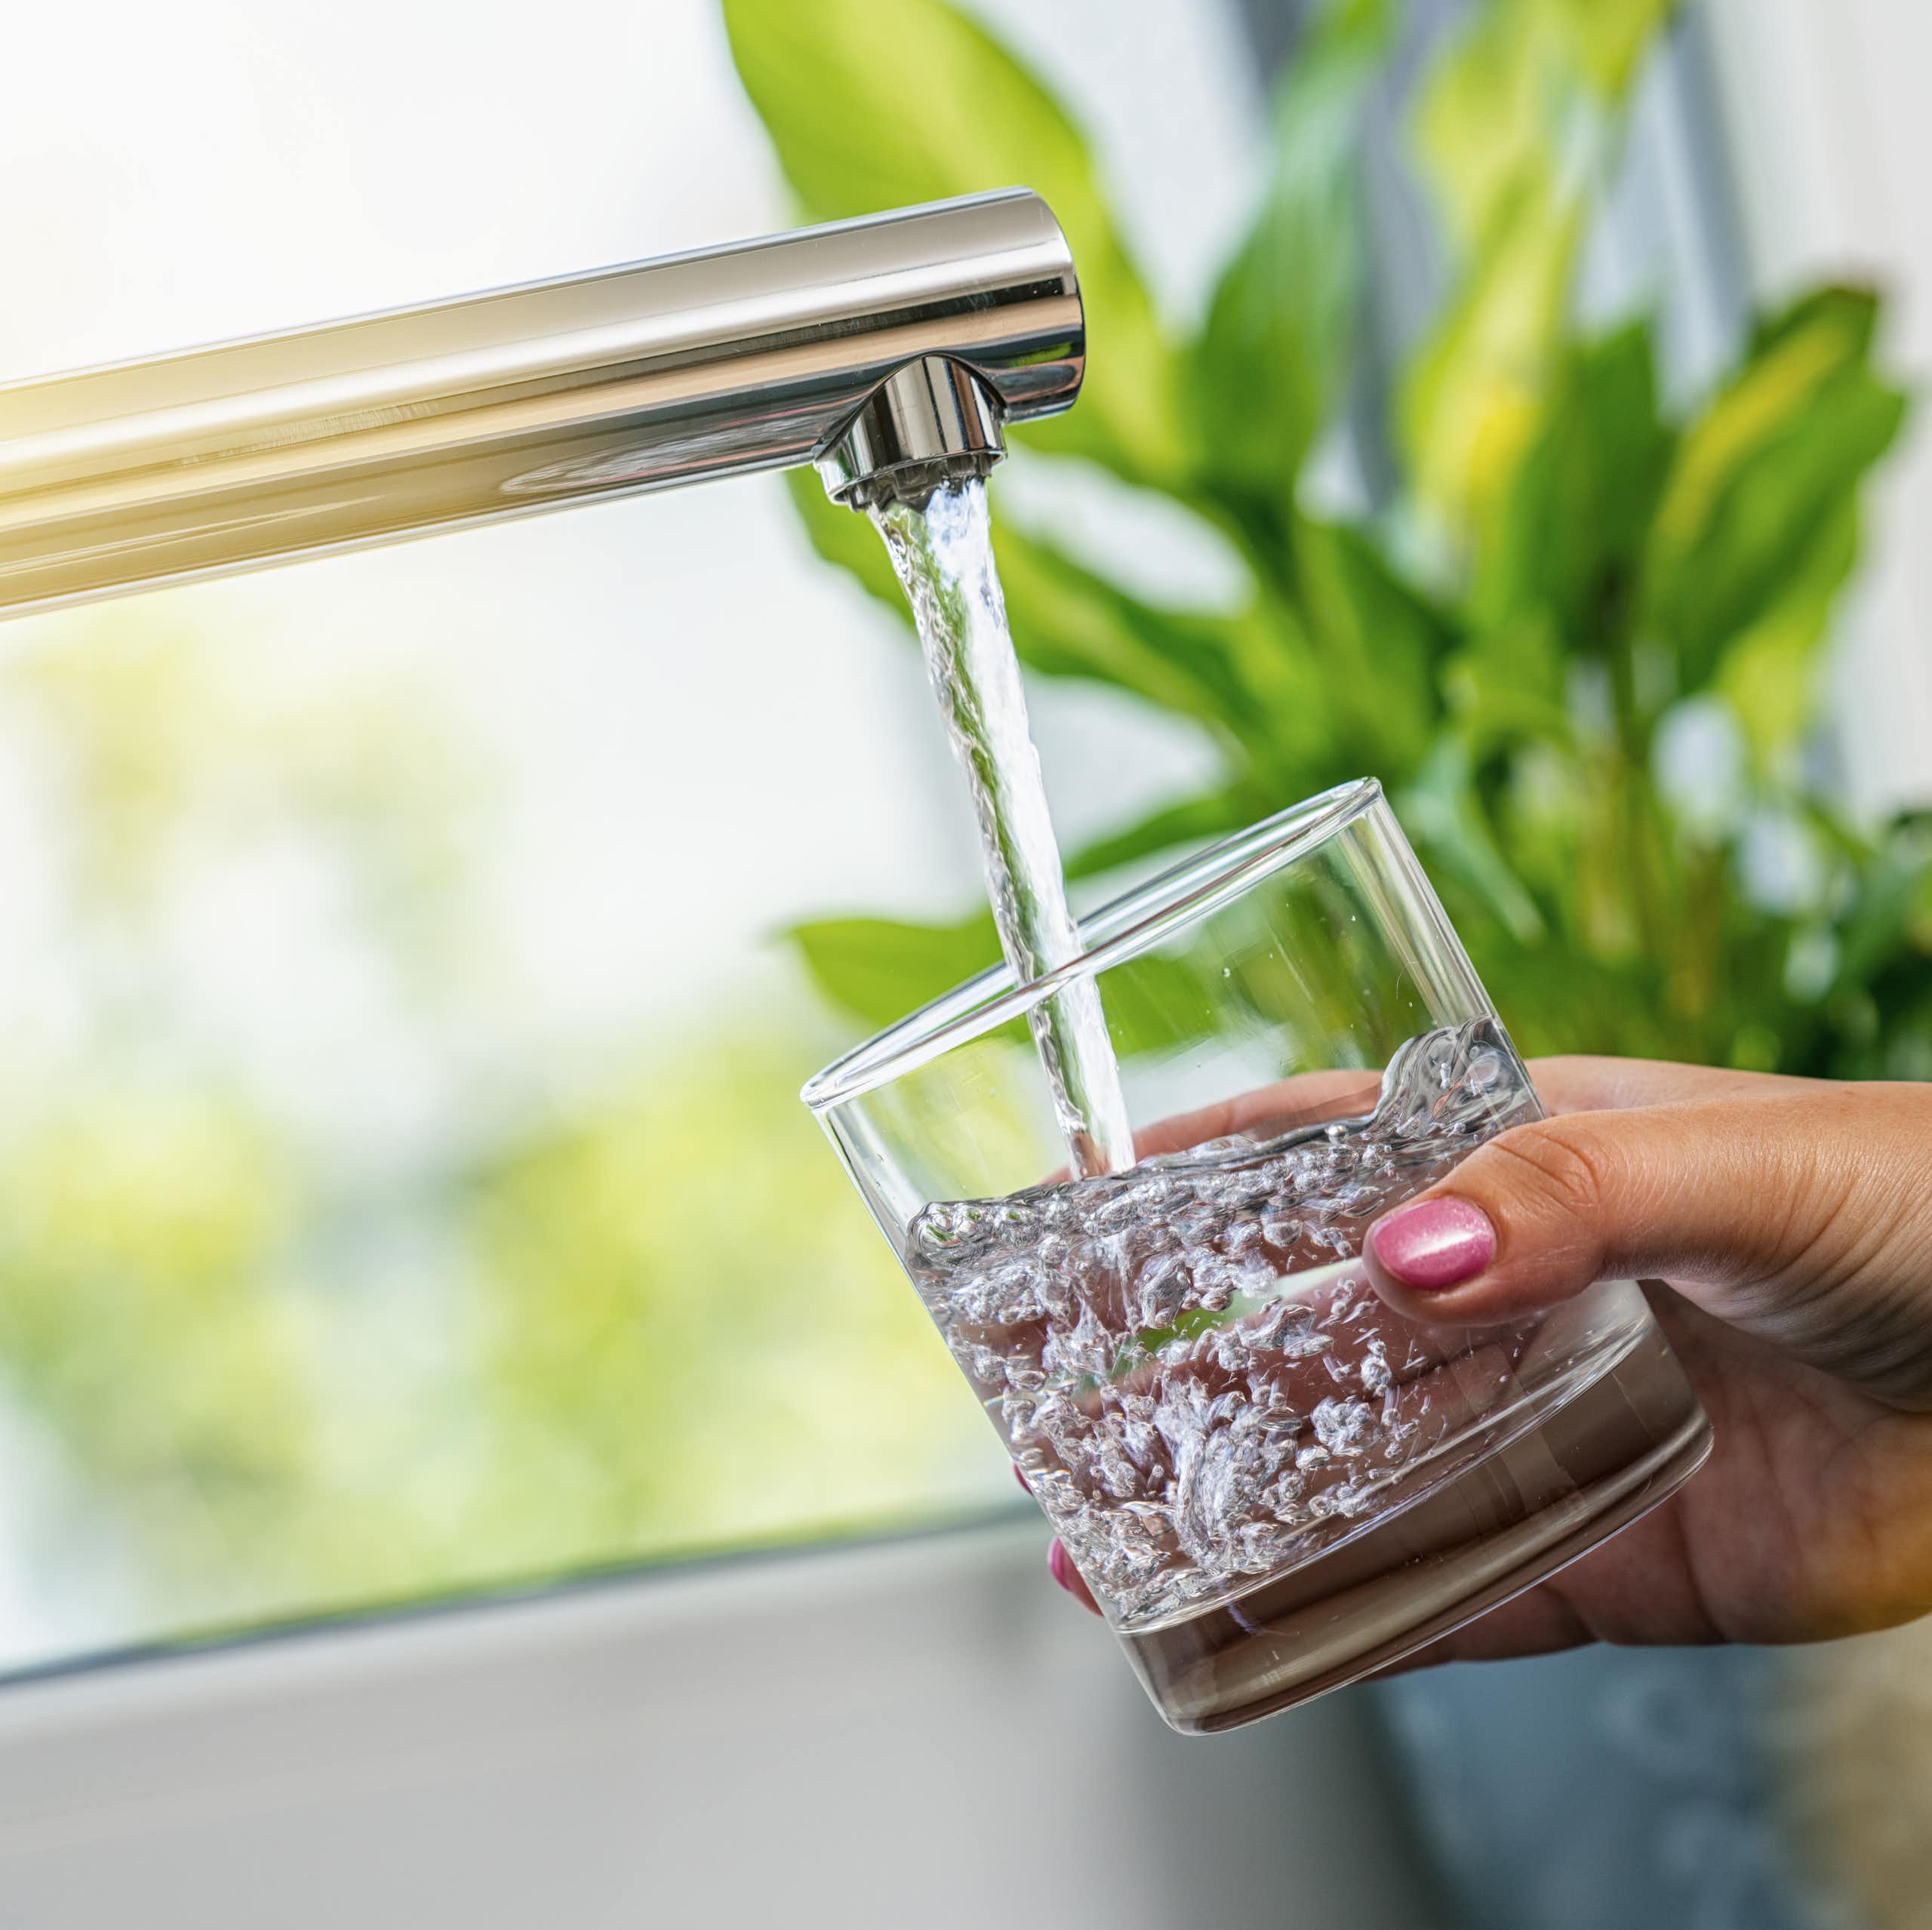 A woman's hand holds a glass of water being filled from a tap